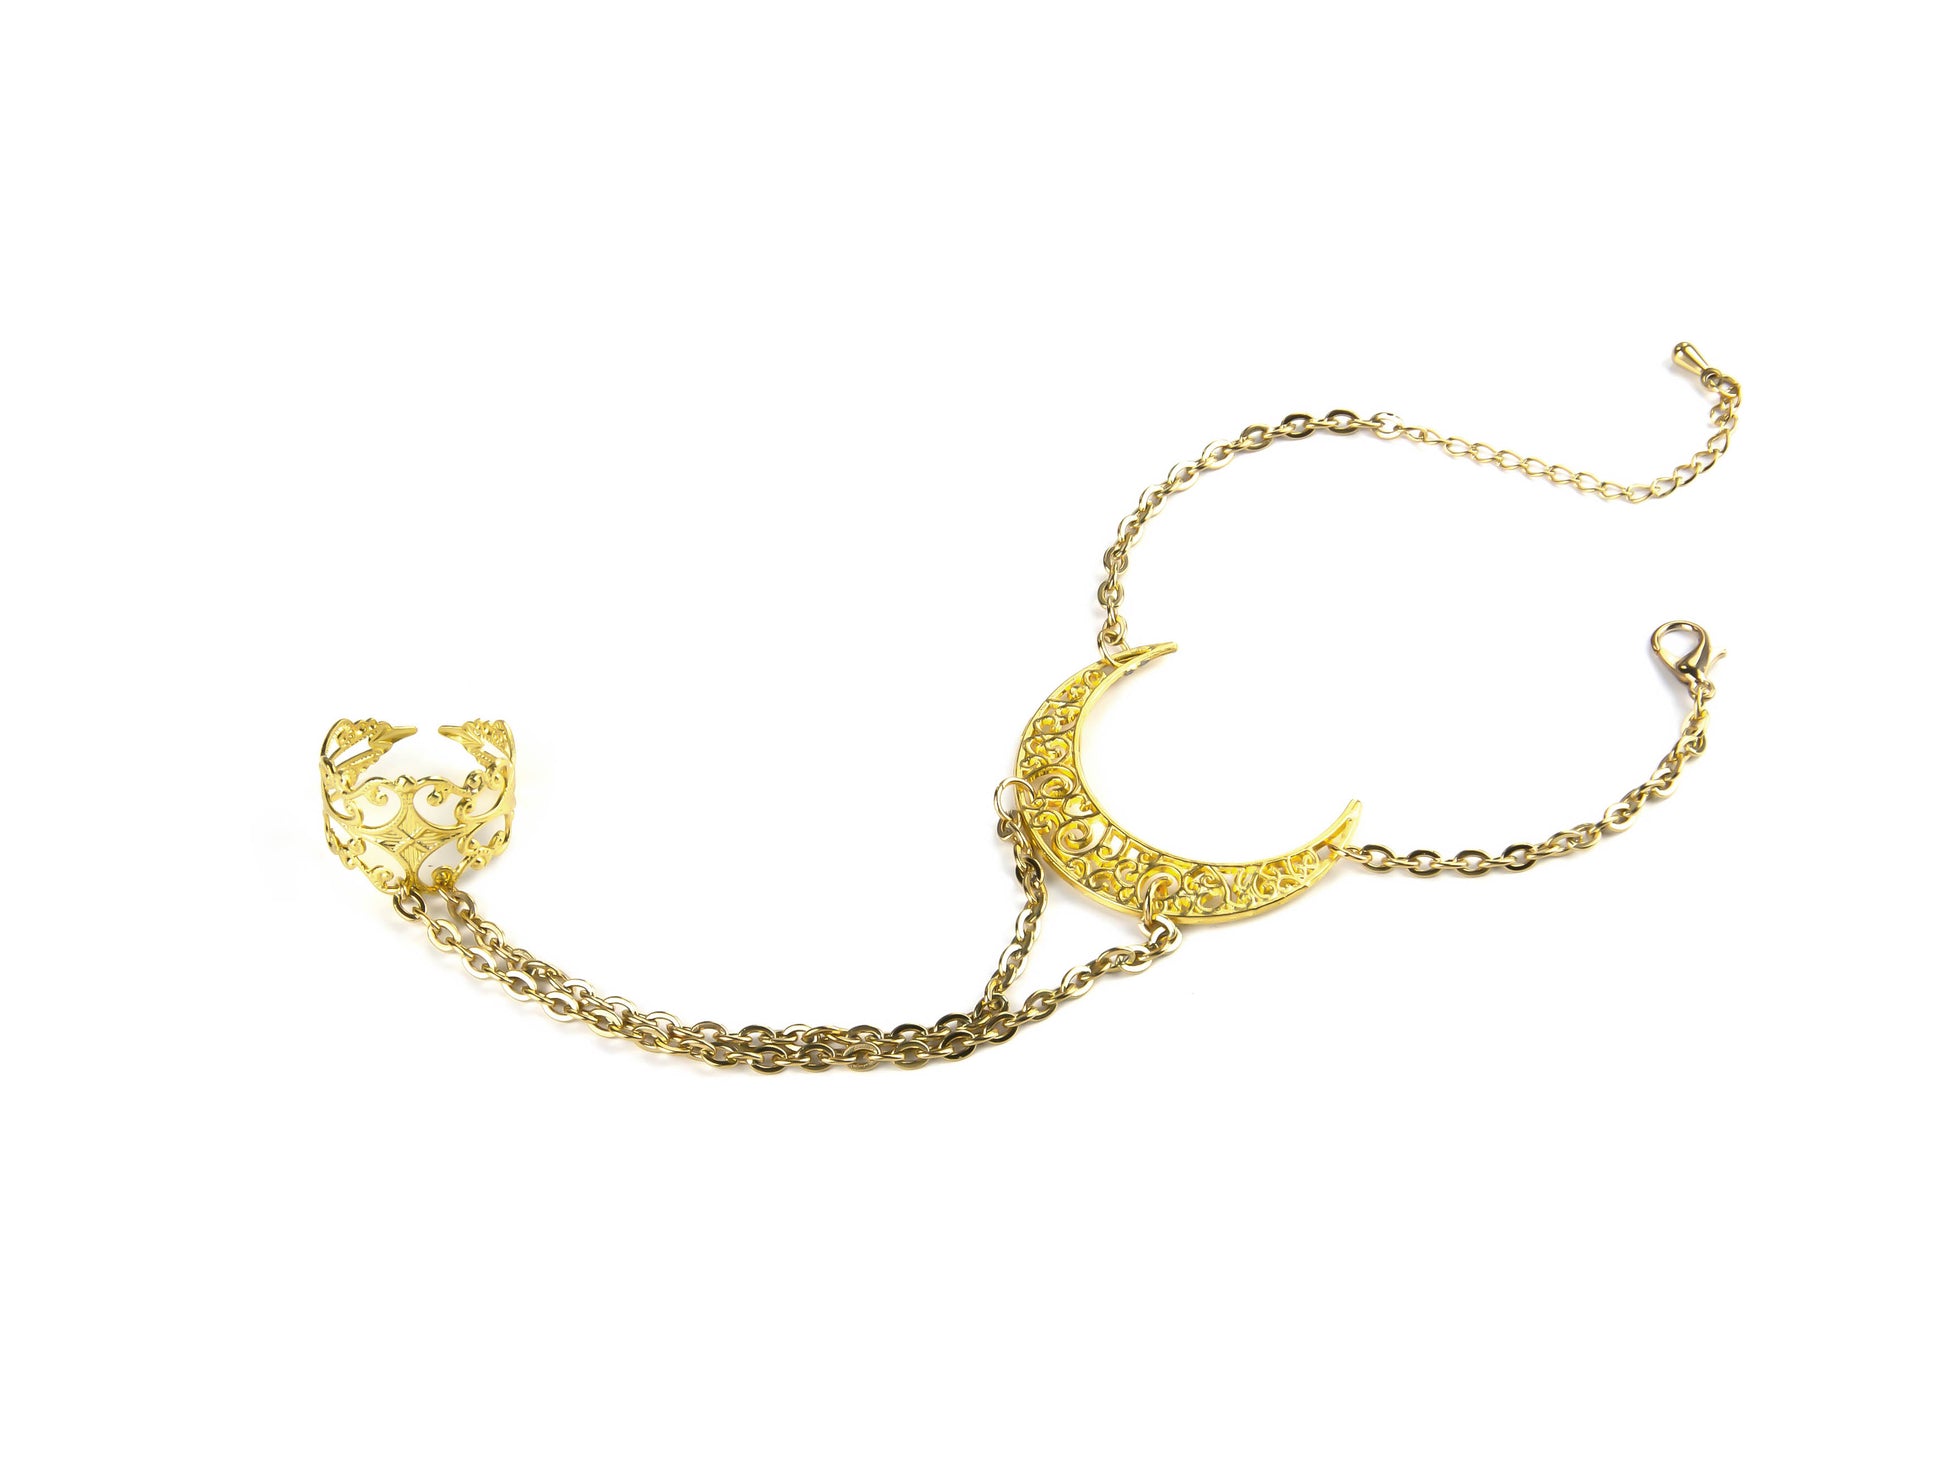 Discover Myril Jewels' lunar charm with this gold hand chain bracelet featuring a moon-inspired design, merging neo-goth elegance and dark allure, ideal for the gothic-chic enthusiast's versatile jewelry collection